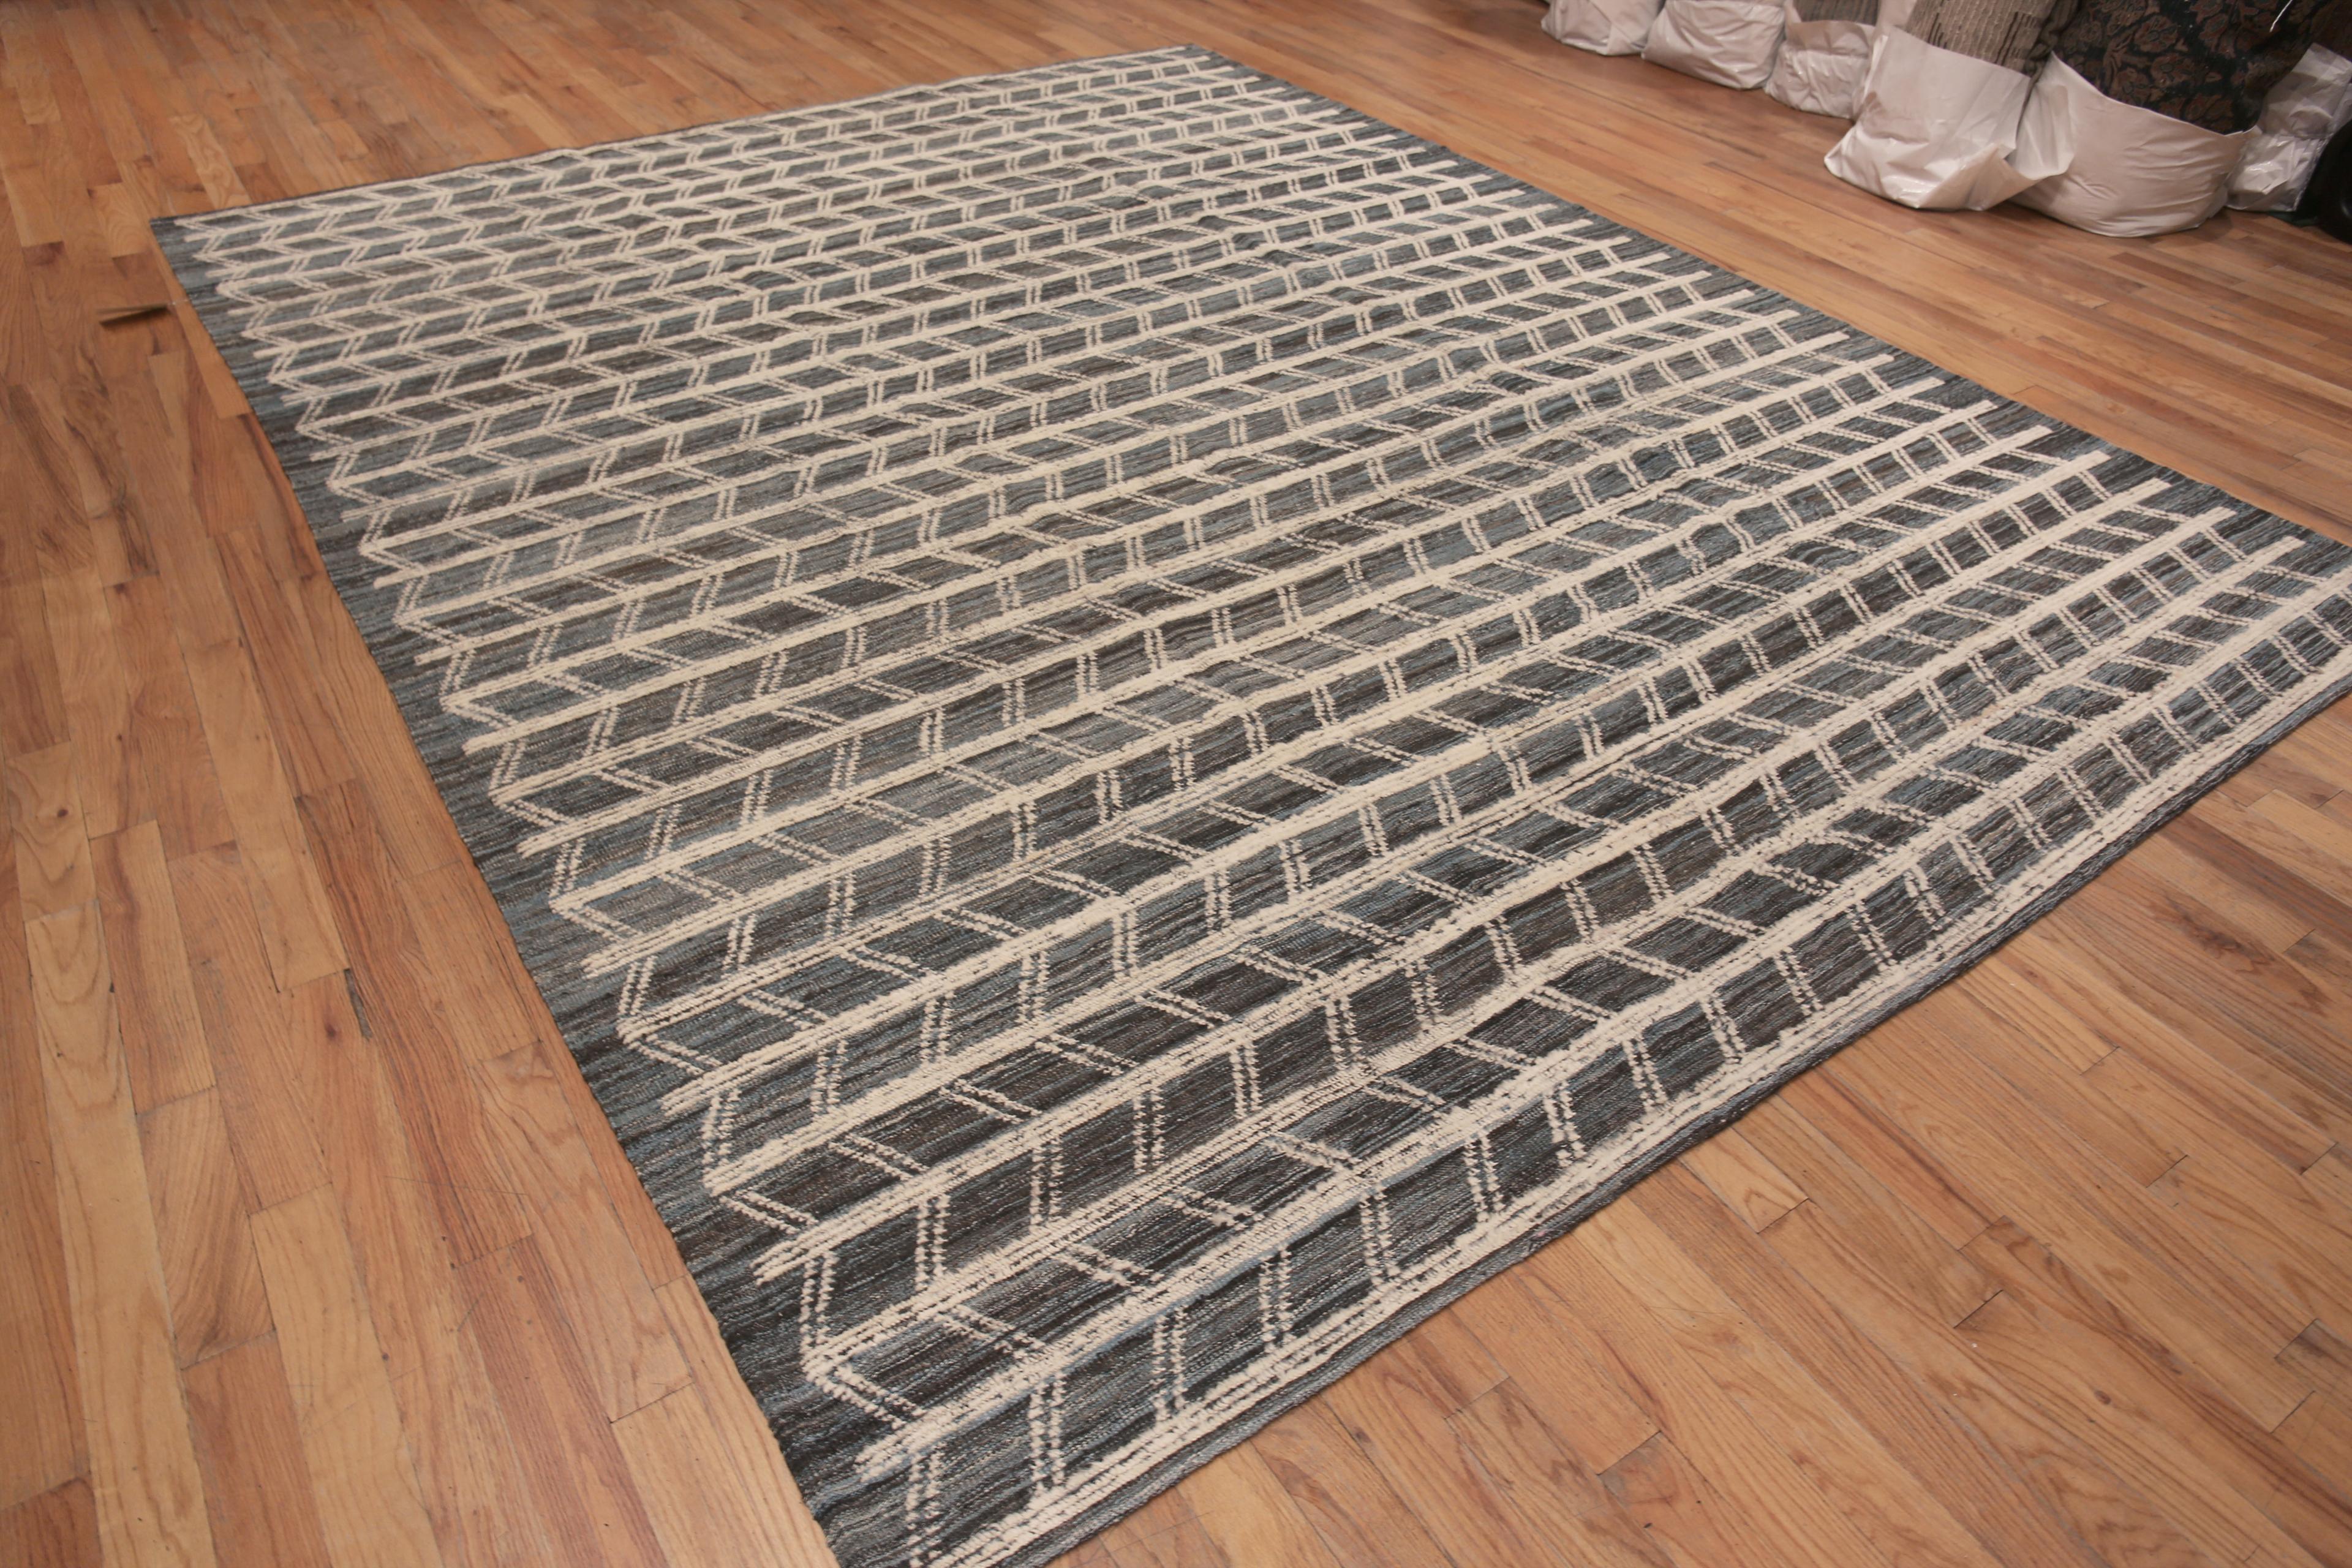 Central Asian Nazmiyal Collection Geometric Zigzag Motif Modern Area Rug 10' x 12'7